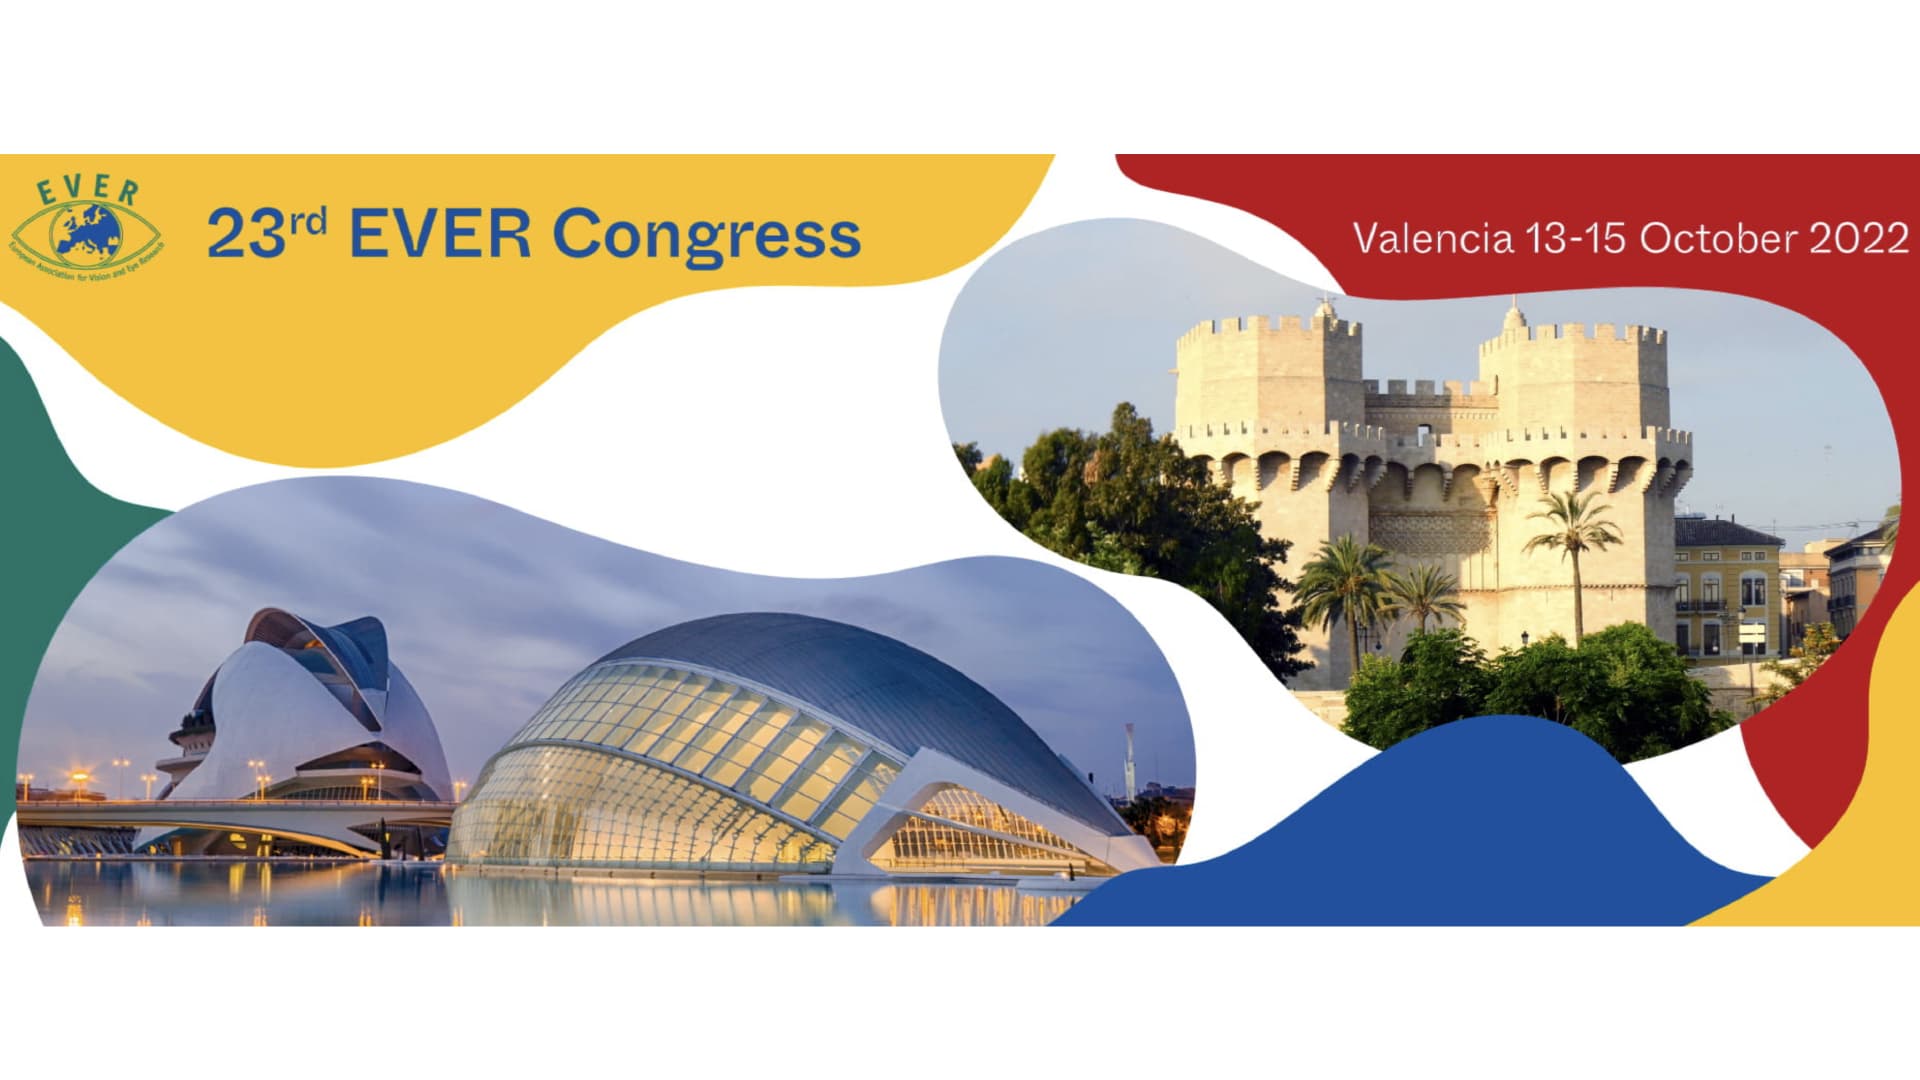 The European Association for Vision and Eye Research (EVER) congress